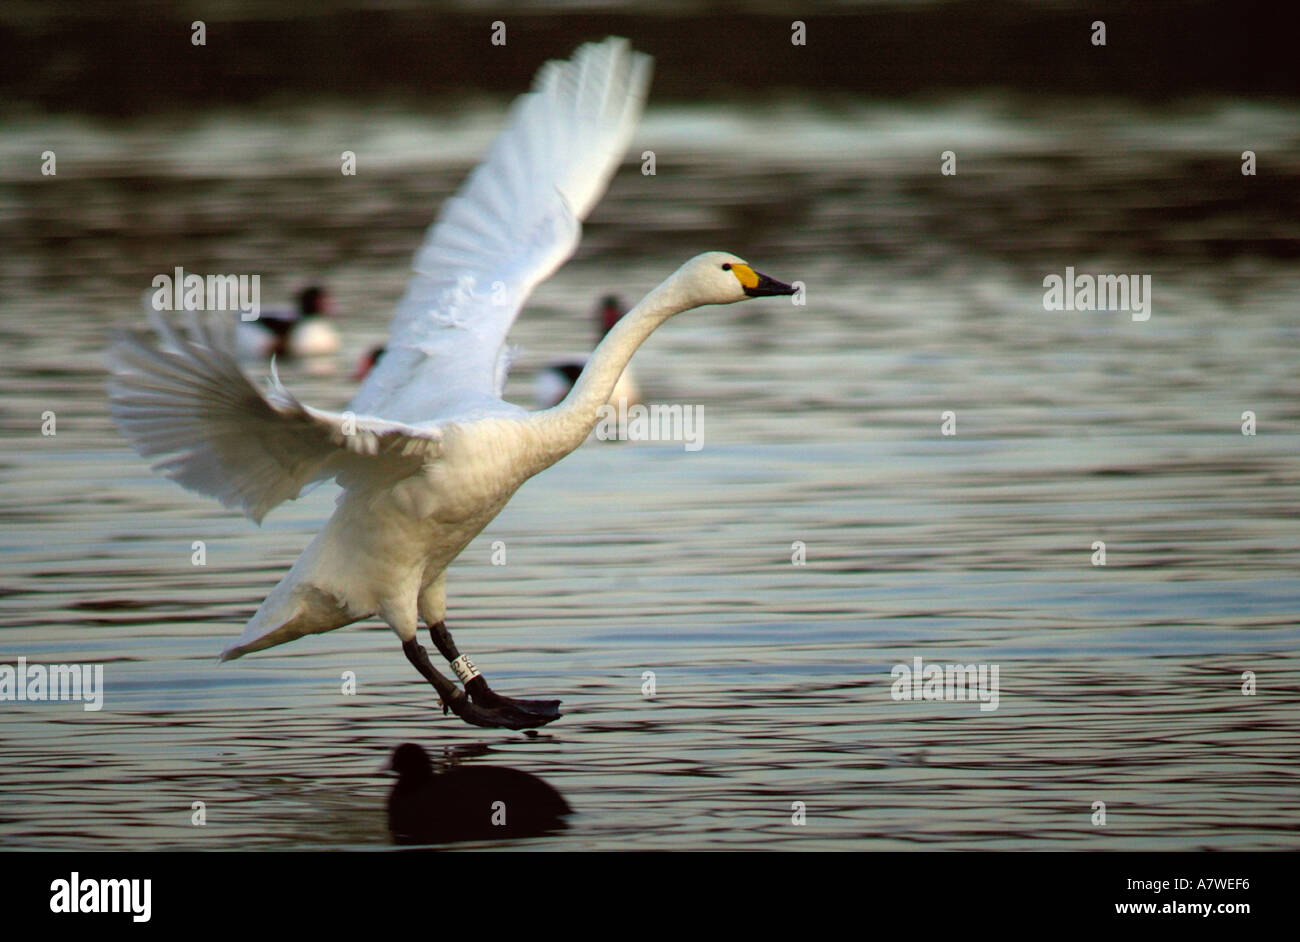 A BEWICK SWAN LANDING AT THE WILDFOWL AND WETLANDS TRUST SLIMBRIDGE UK DURING ITS WINTER MIGRATION FROM SIBERIA Stock Photo